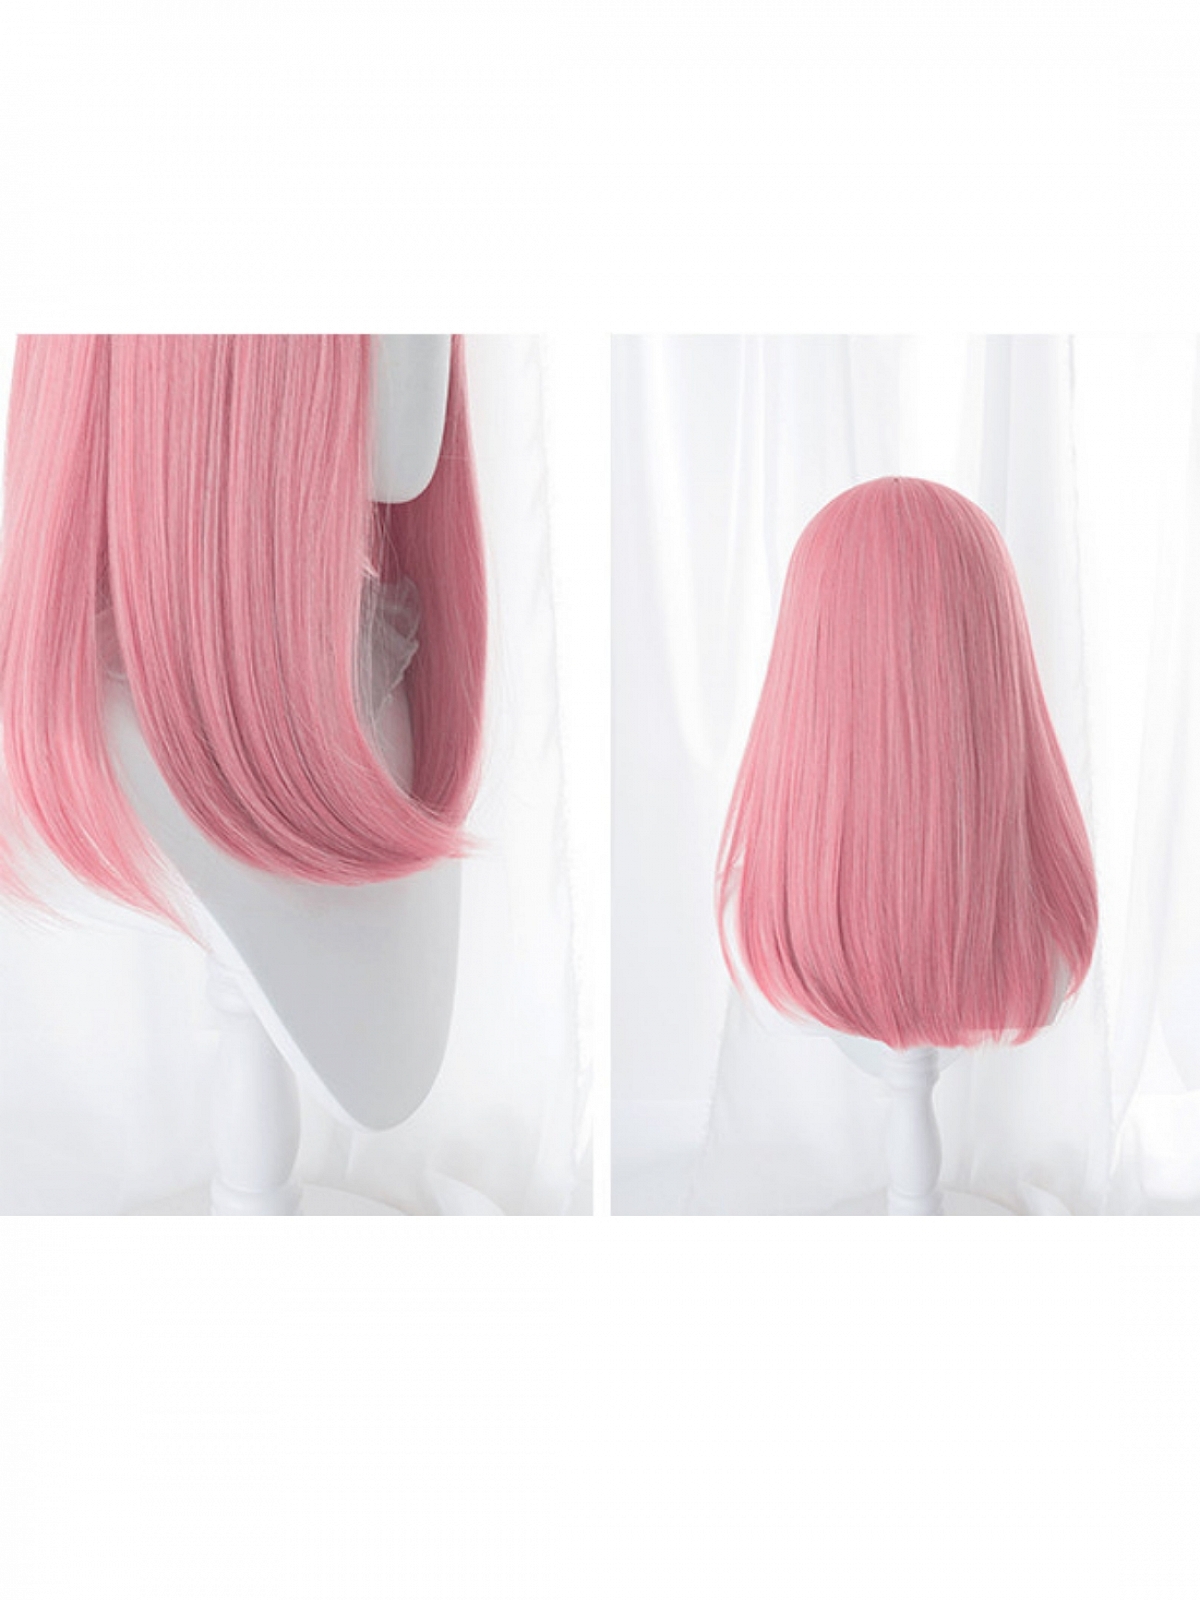 Evahair Sweet Strawberry Pink Long Straight Synthetic Wig with Bangs - Home  - EvaHair